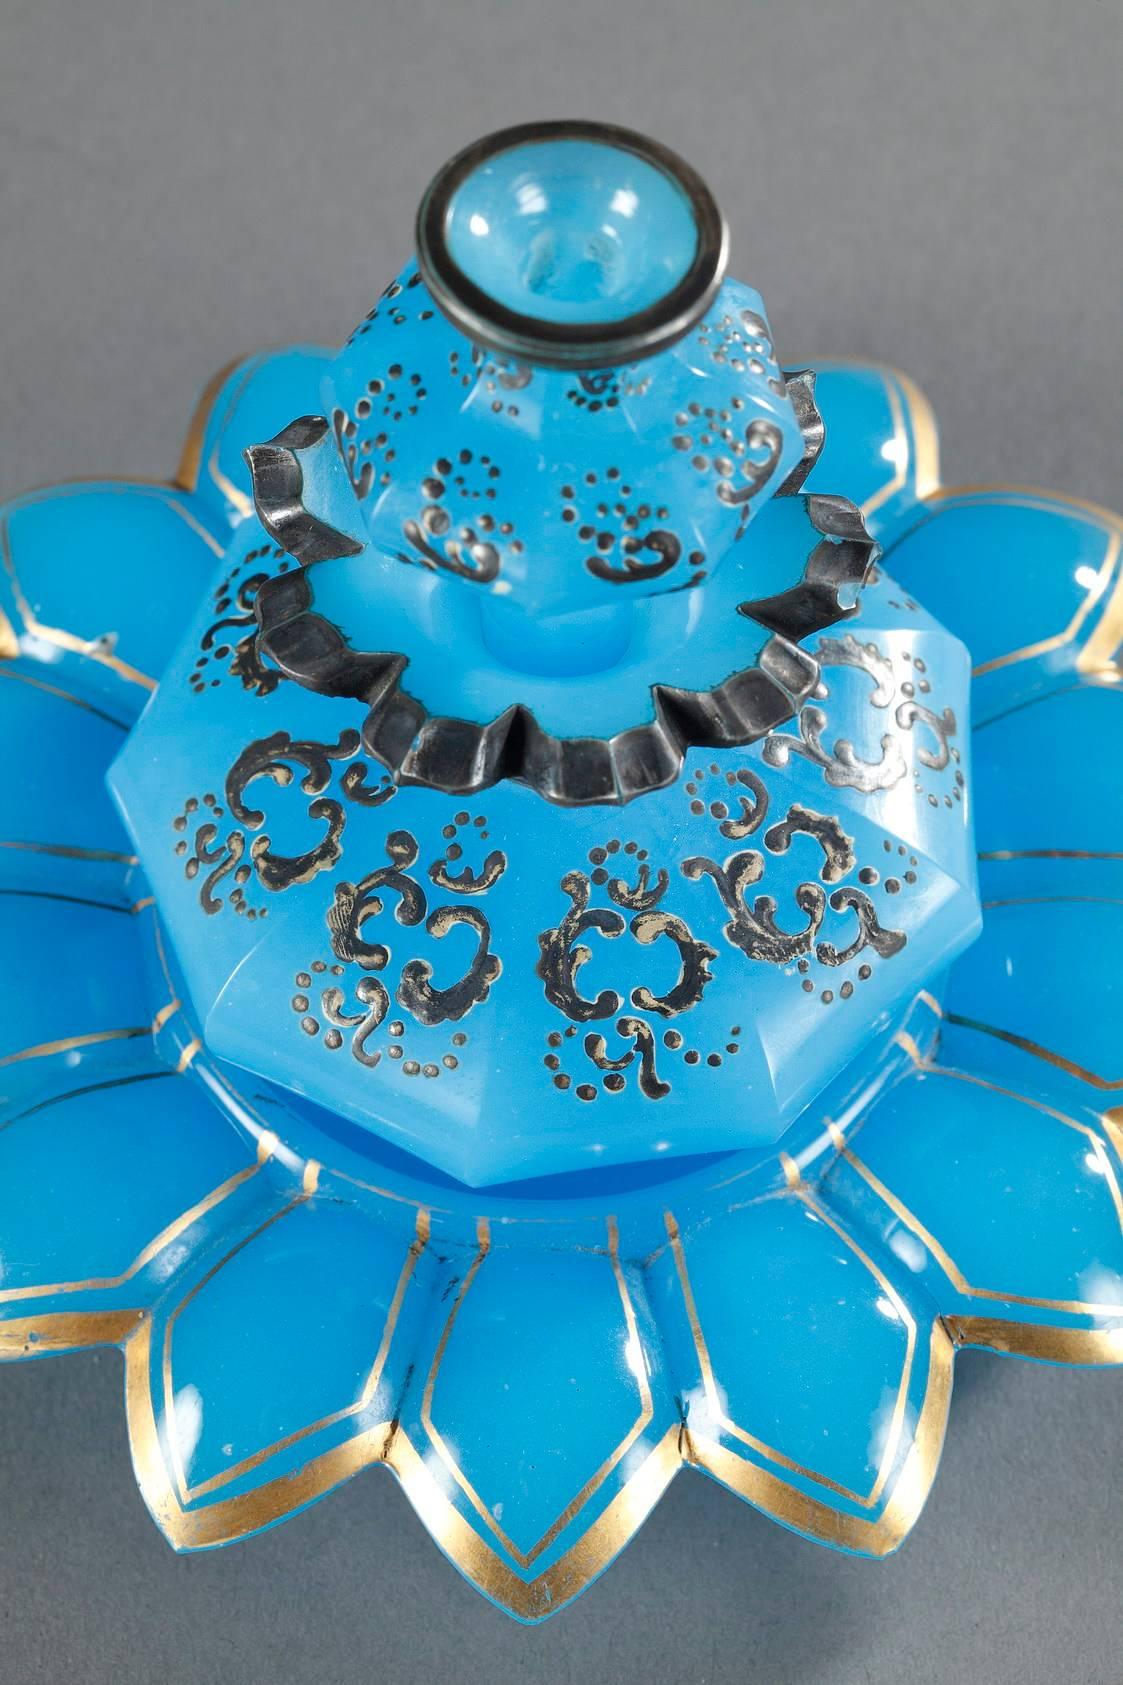 Mid-19th century blue, opaline crystal set composed of a small flask, its stopper and a small, flower-shaped cup. The perfume bottle and flask are decorated with enameled and silver stylized rinceau, and the cup is highlighted with gilding. Light